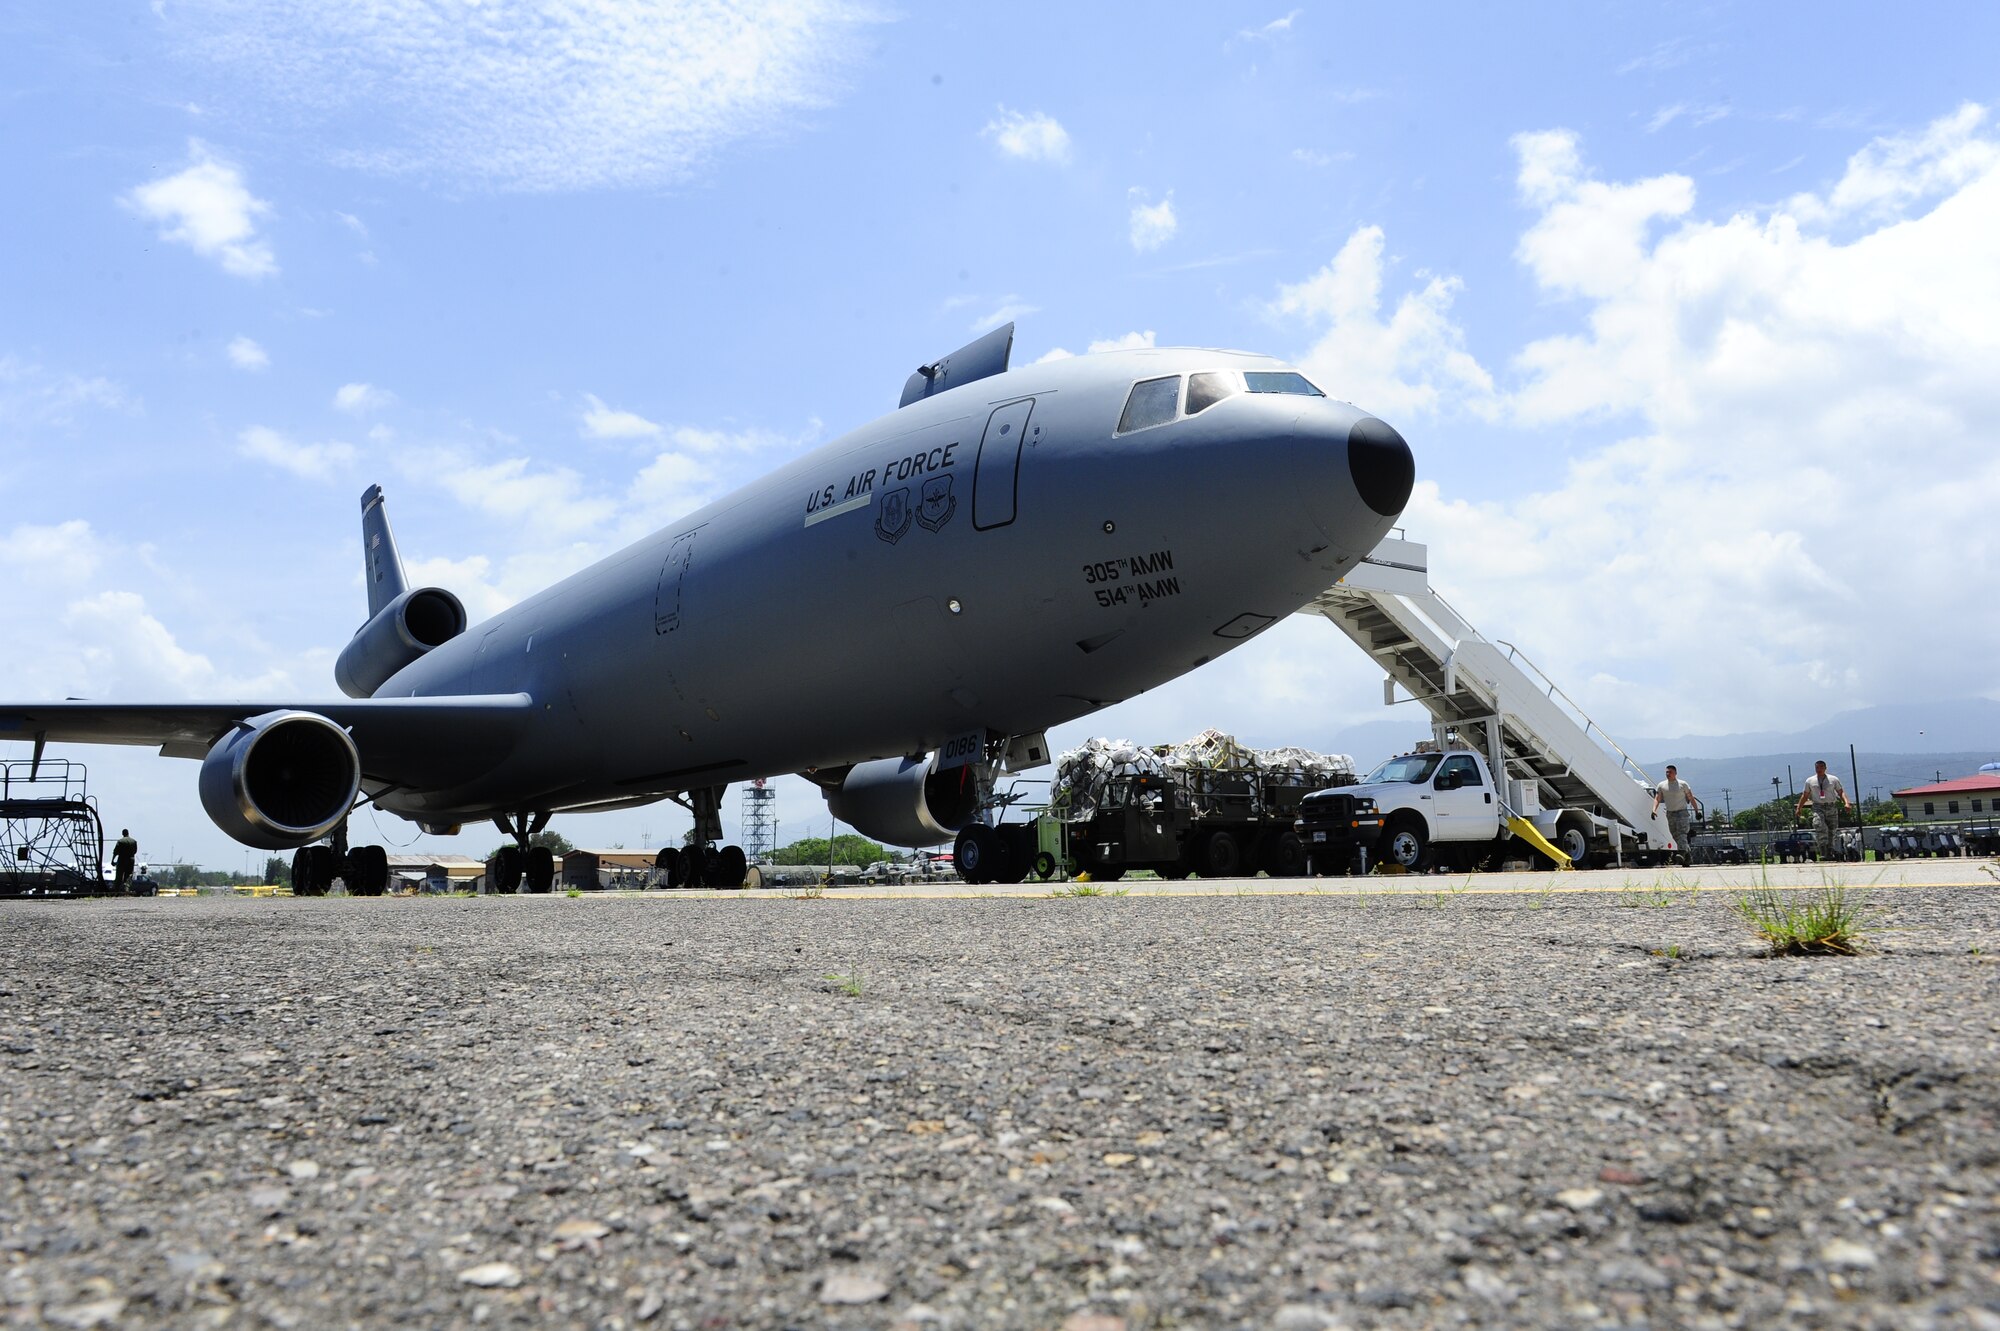 Over 29,000 pounds of humanitarian aid and supplies are unloaded from a U. S. Air Force KC-10 Extender bound for Honduran citizens in need by the 612th Air Base Squadron at Soto Cano Air Base, Honduras, June 6, 2014.  The supplies were sent to Honduras through the Denton Program, which allows private U.S. citizens and organizations to use space available on U.S. military cargo planes to transport humanitarian goods to approved countries in need.  (Photo by Martin Chahin)